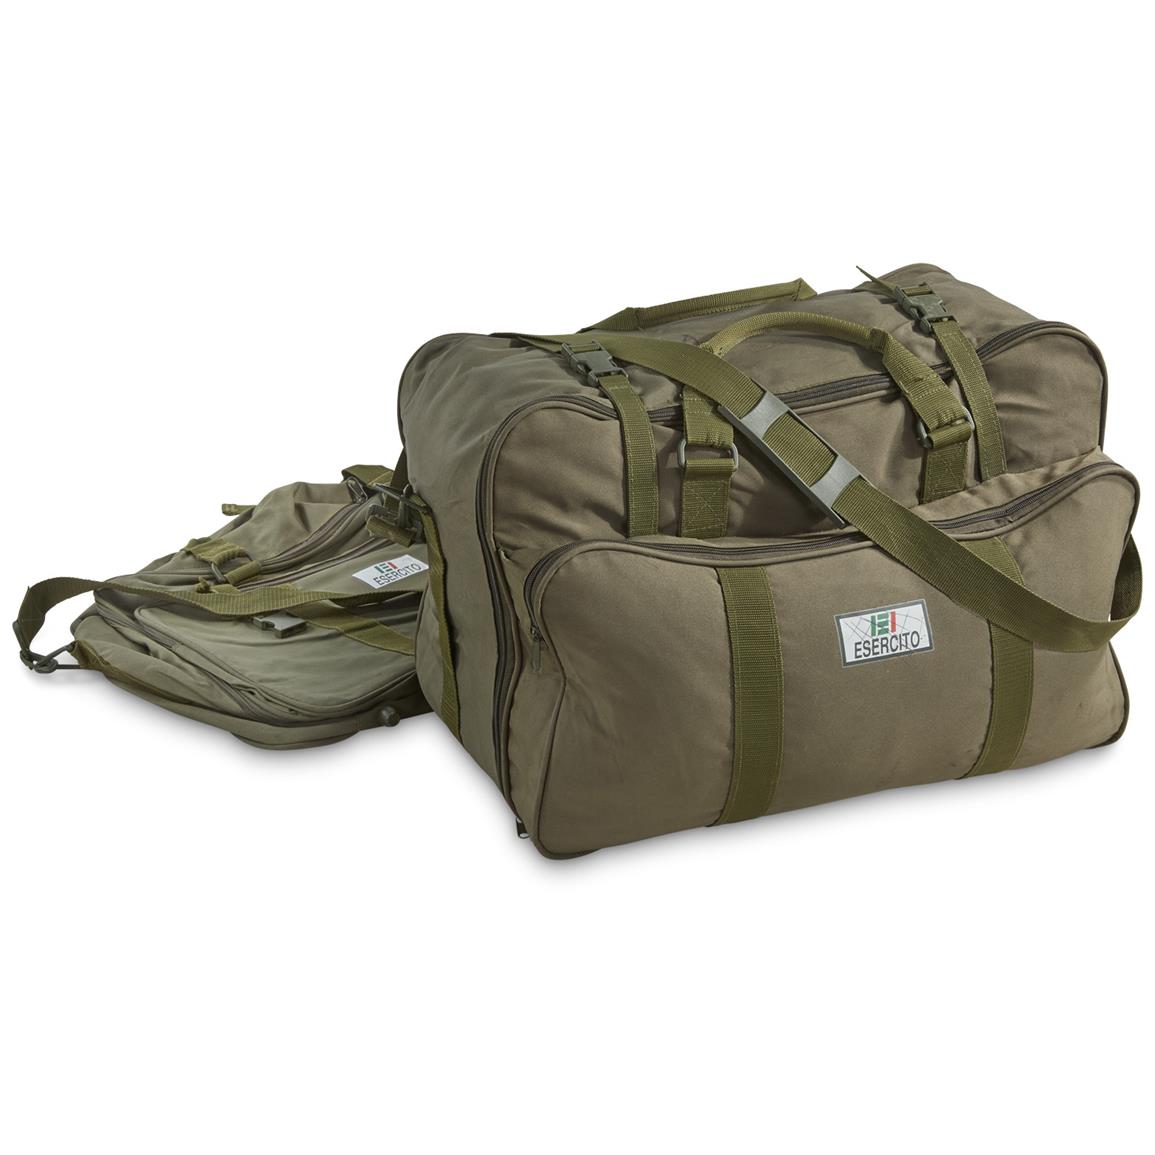 Used Army Duffle Bag For Sale | SEMA Data Co-op